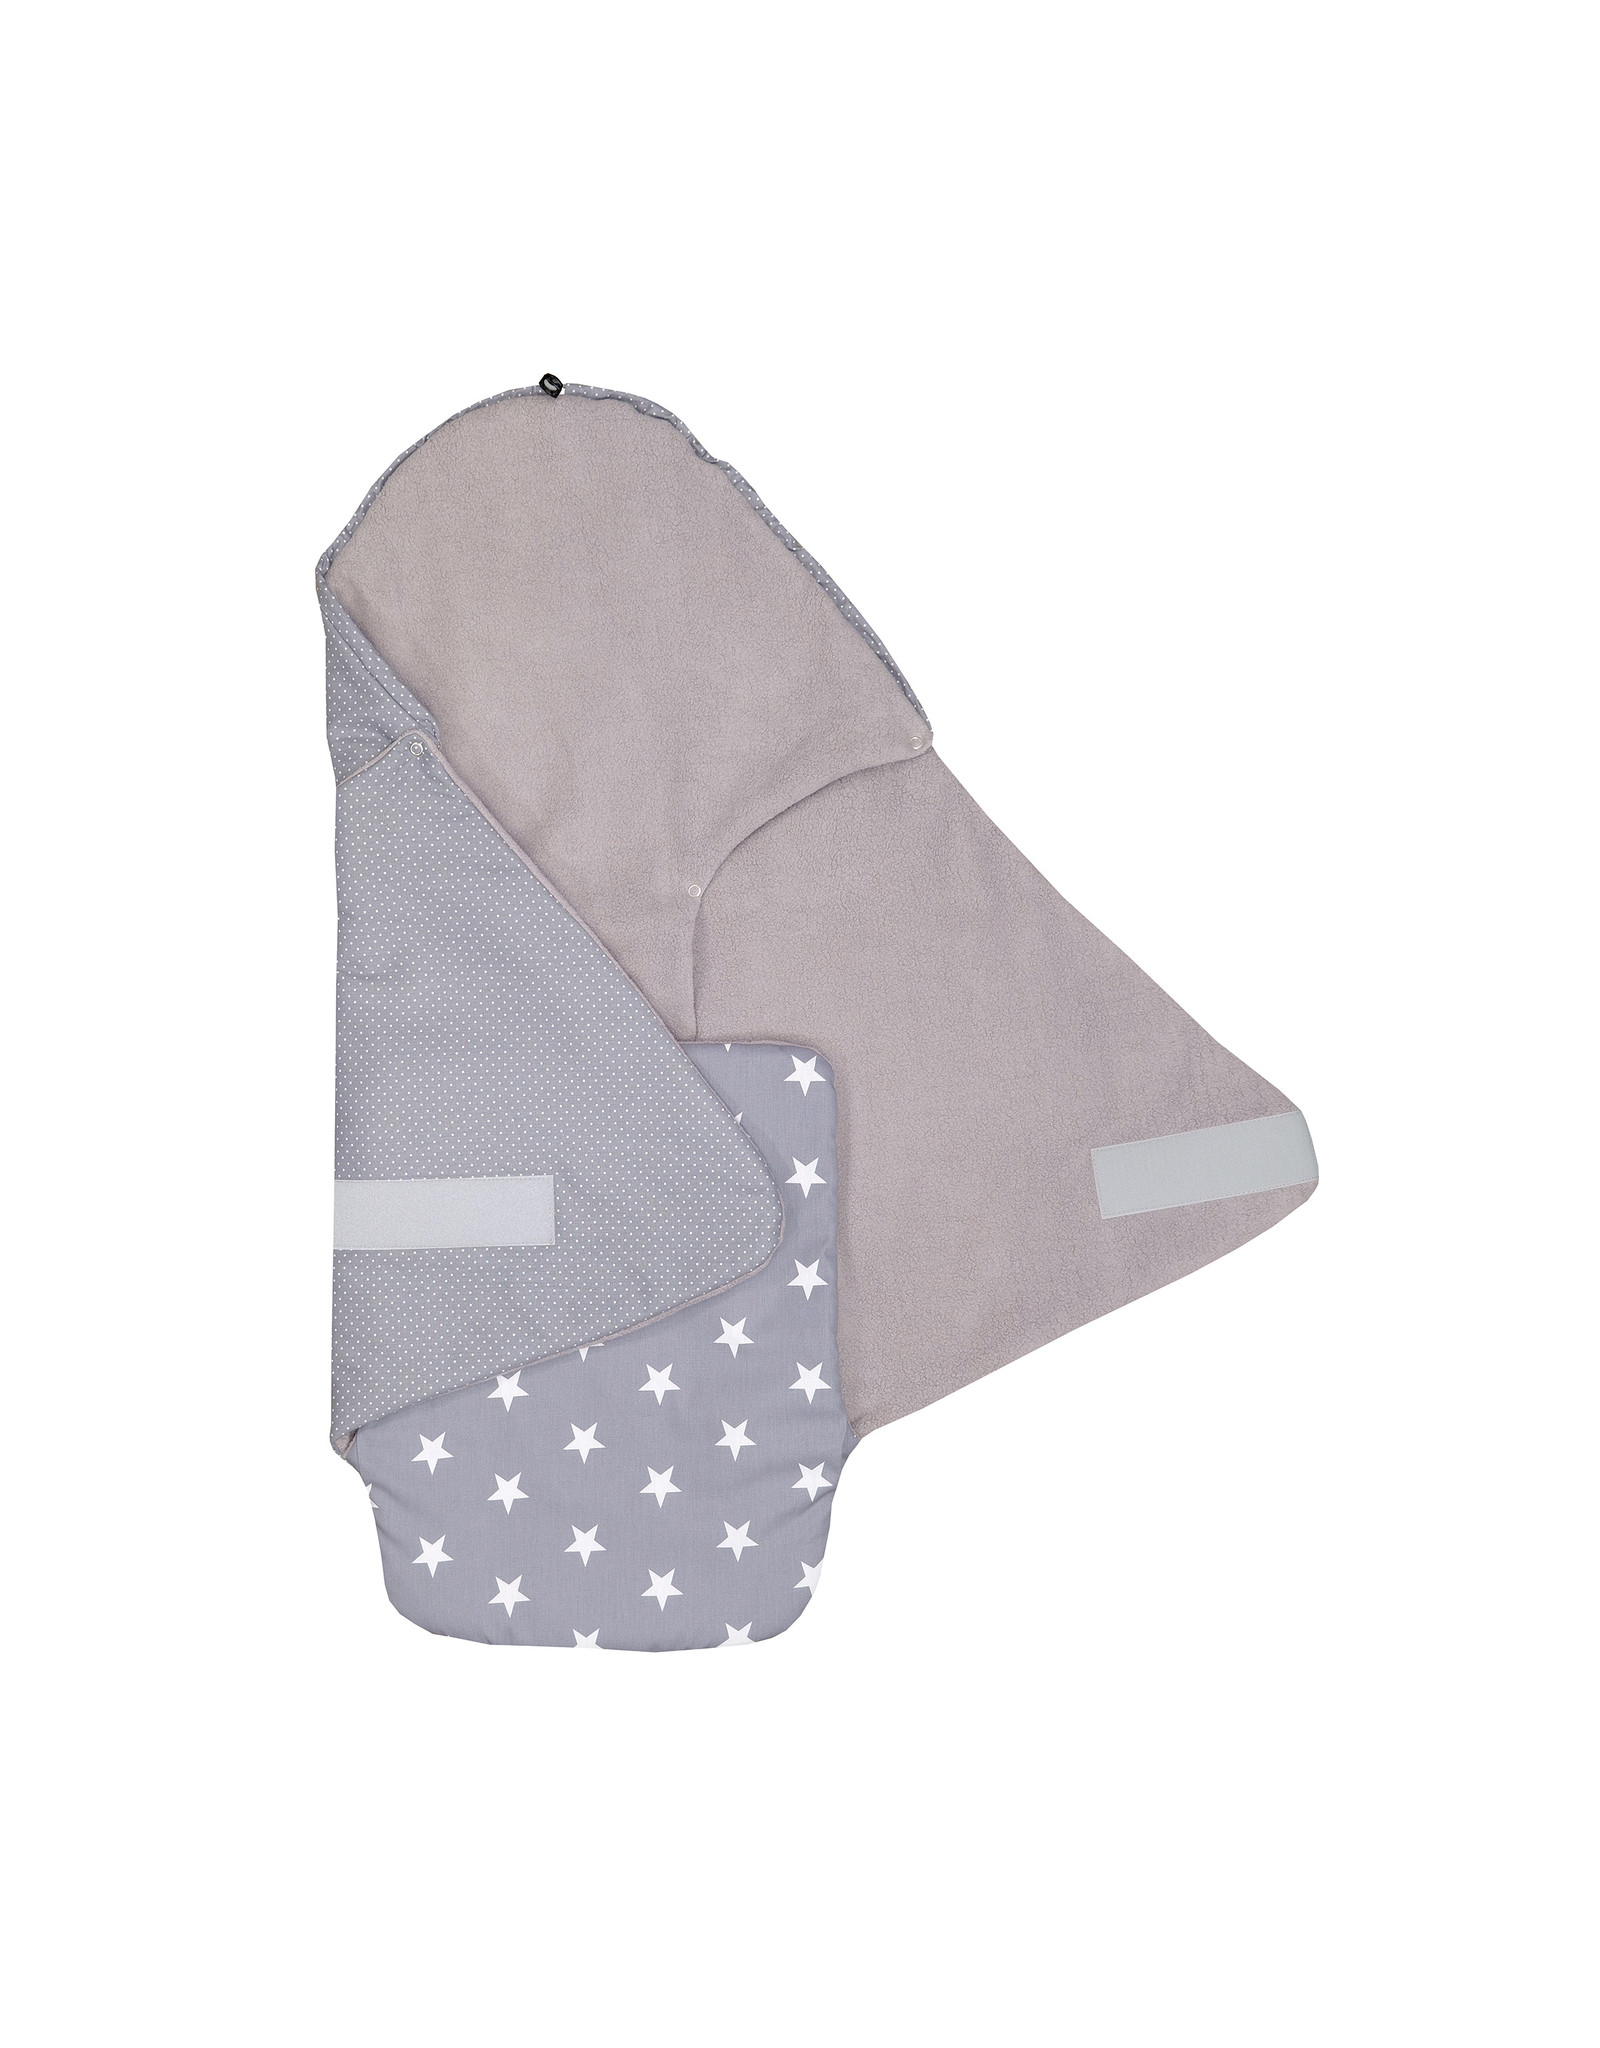 Ullenboom ULLENBOOM maxi cosi blanket l Universal fit for baby seats and stroller seats l 0-9 months I Grey stars